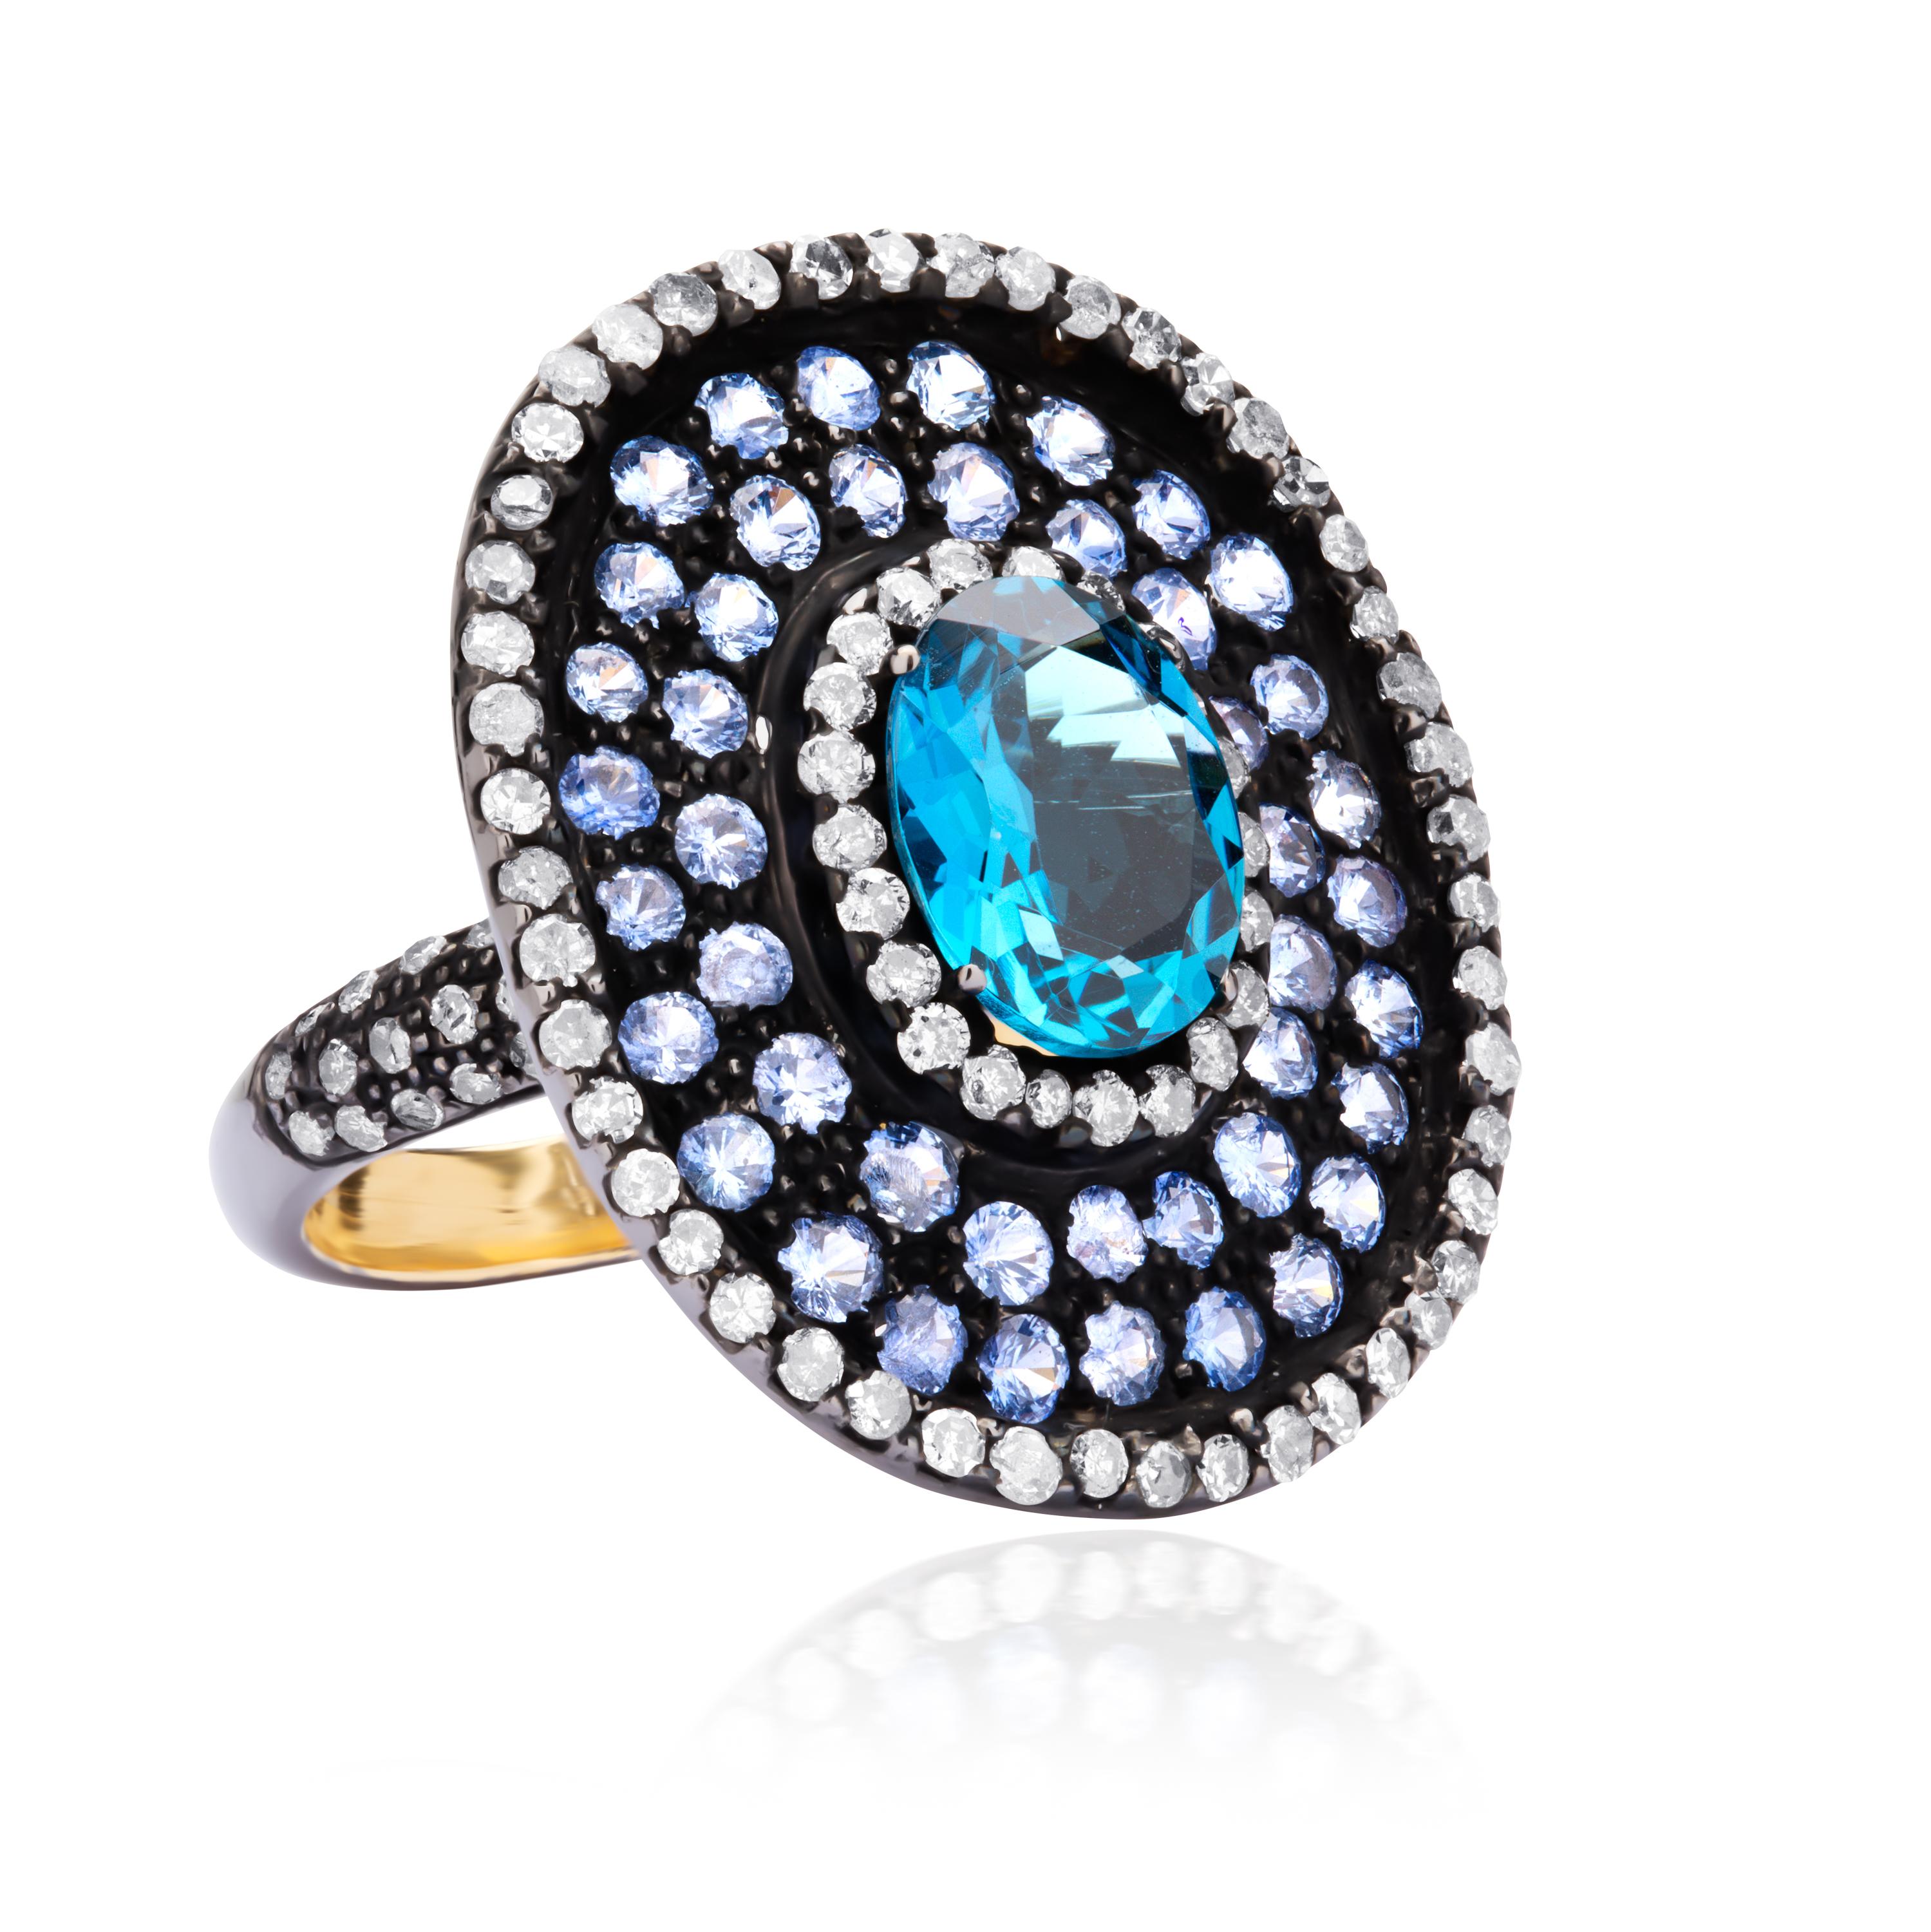 Crafted over 18K gold and sterling silver, this exquisite finger bauble, is crowned with an oval faceted blue topaz 2.58Cts glittering within a circular frame embellished with blue sapphires and diamonds  (IJ Color, SI Clarity), all supported by